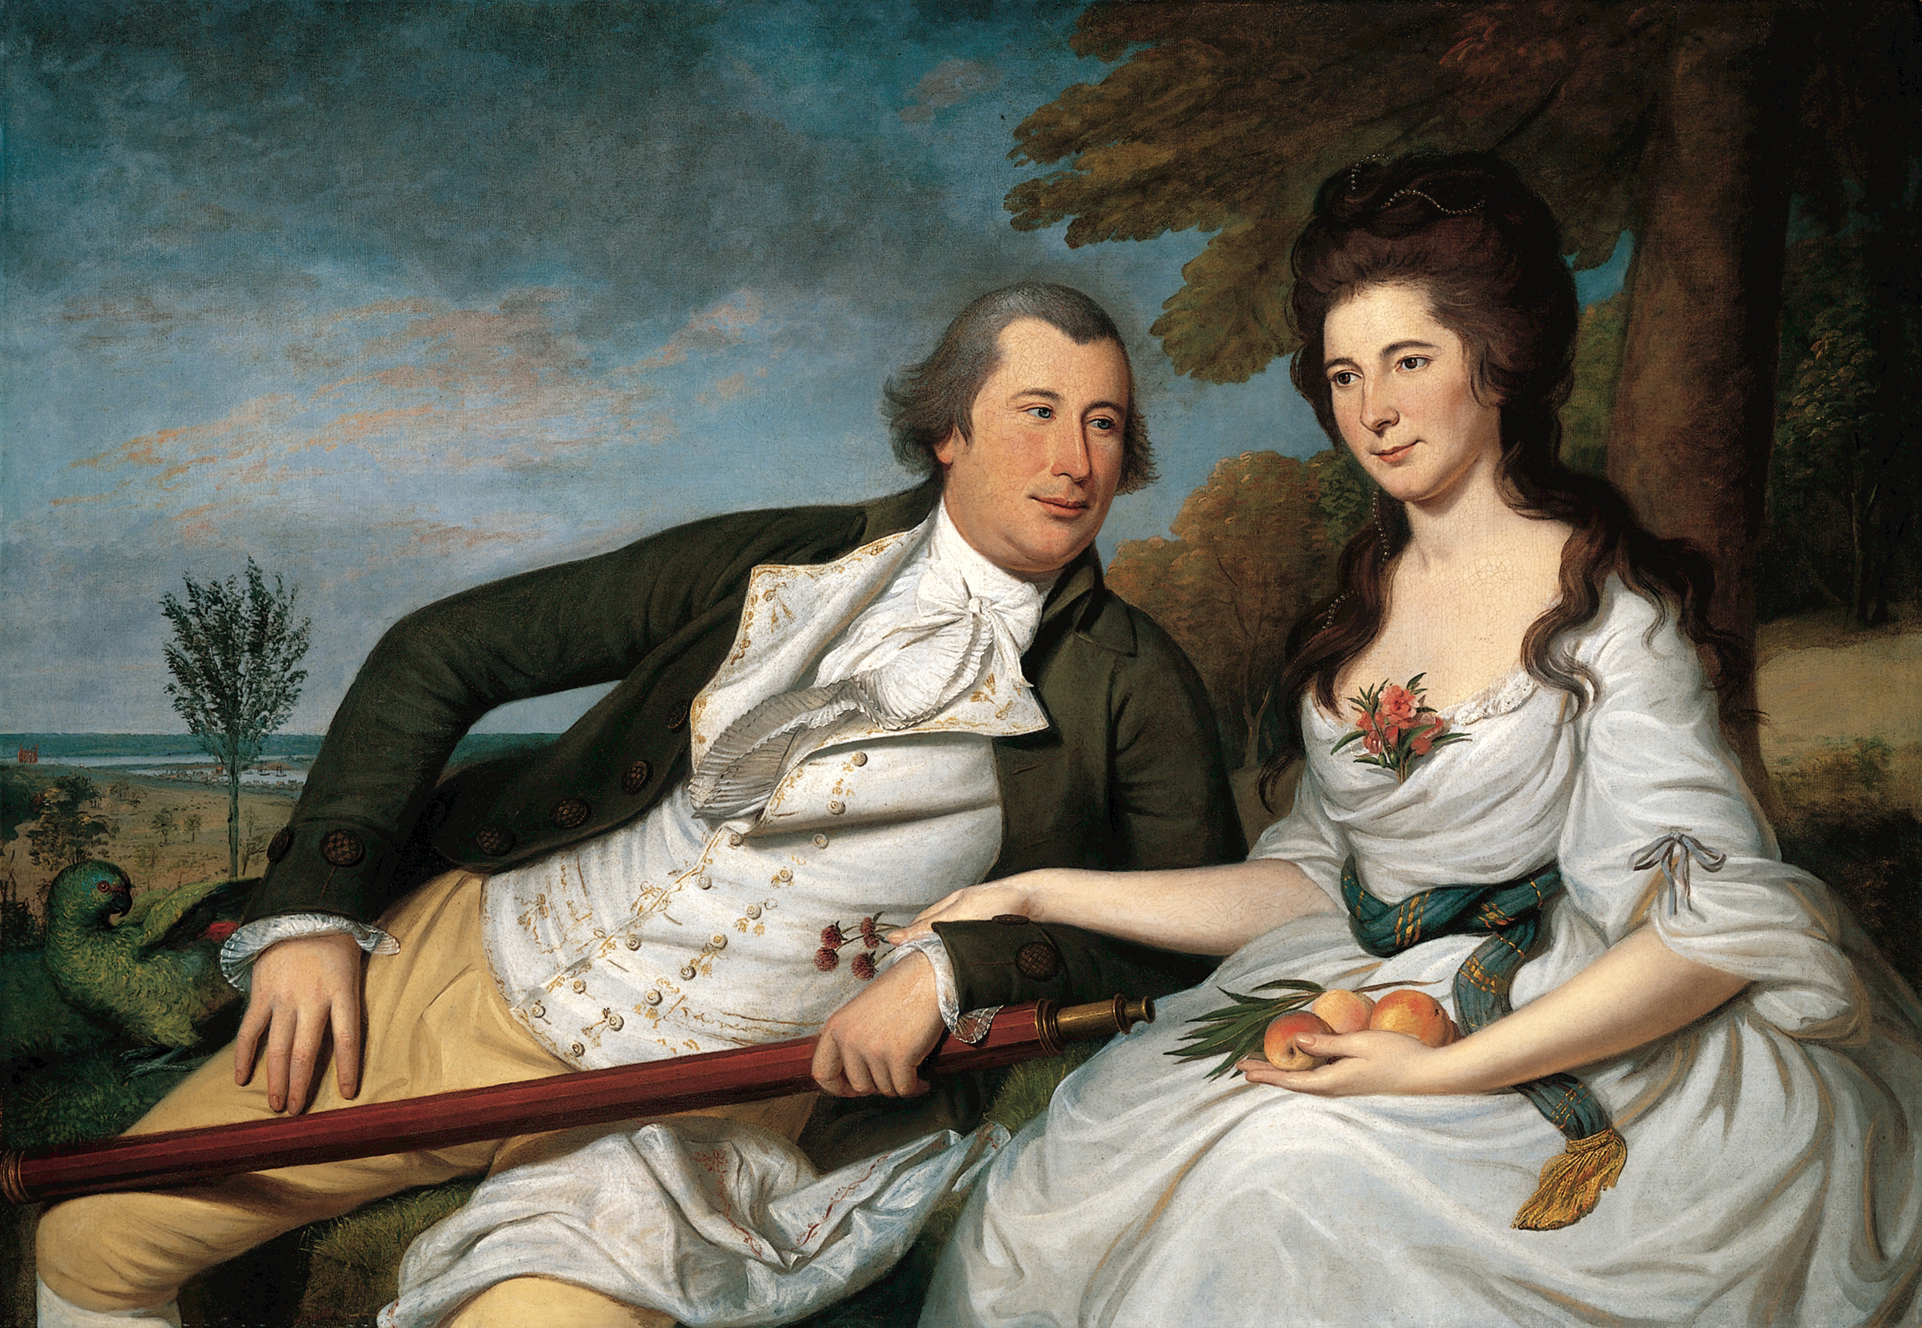 Benjamin And Eleanor Ridgely Laming by Charles Willson Peale, 1788